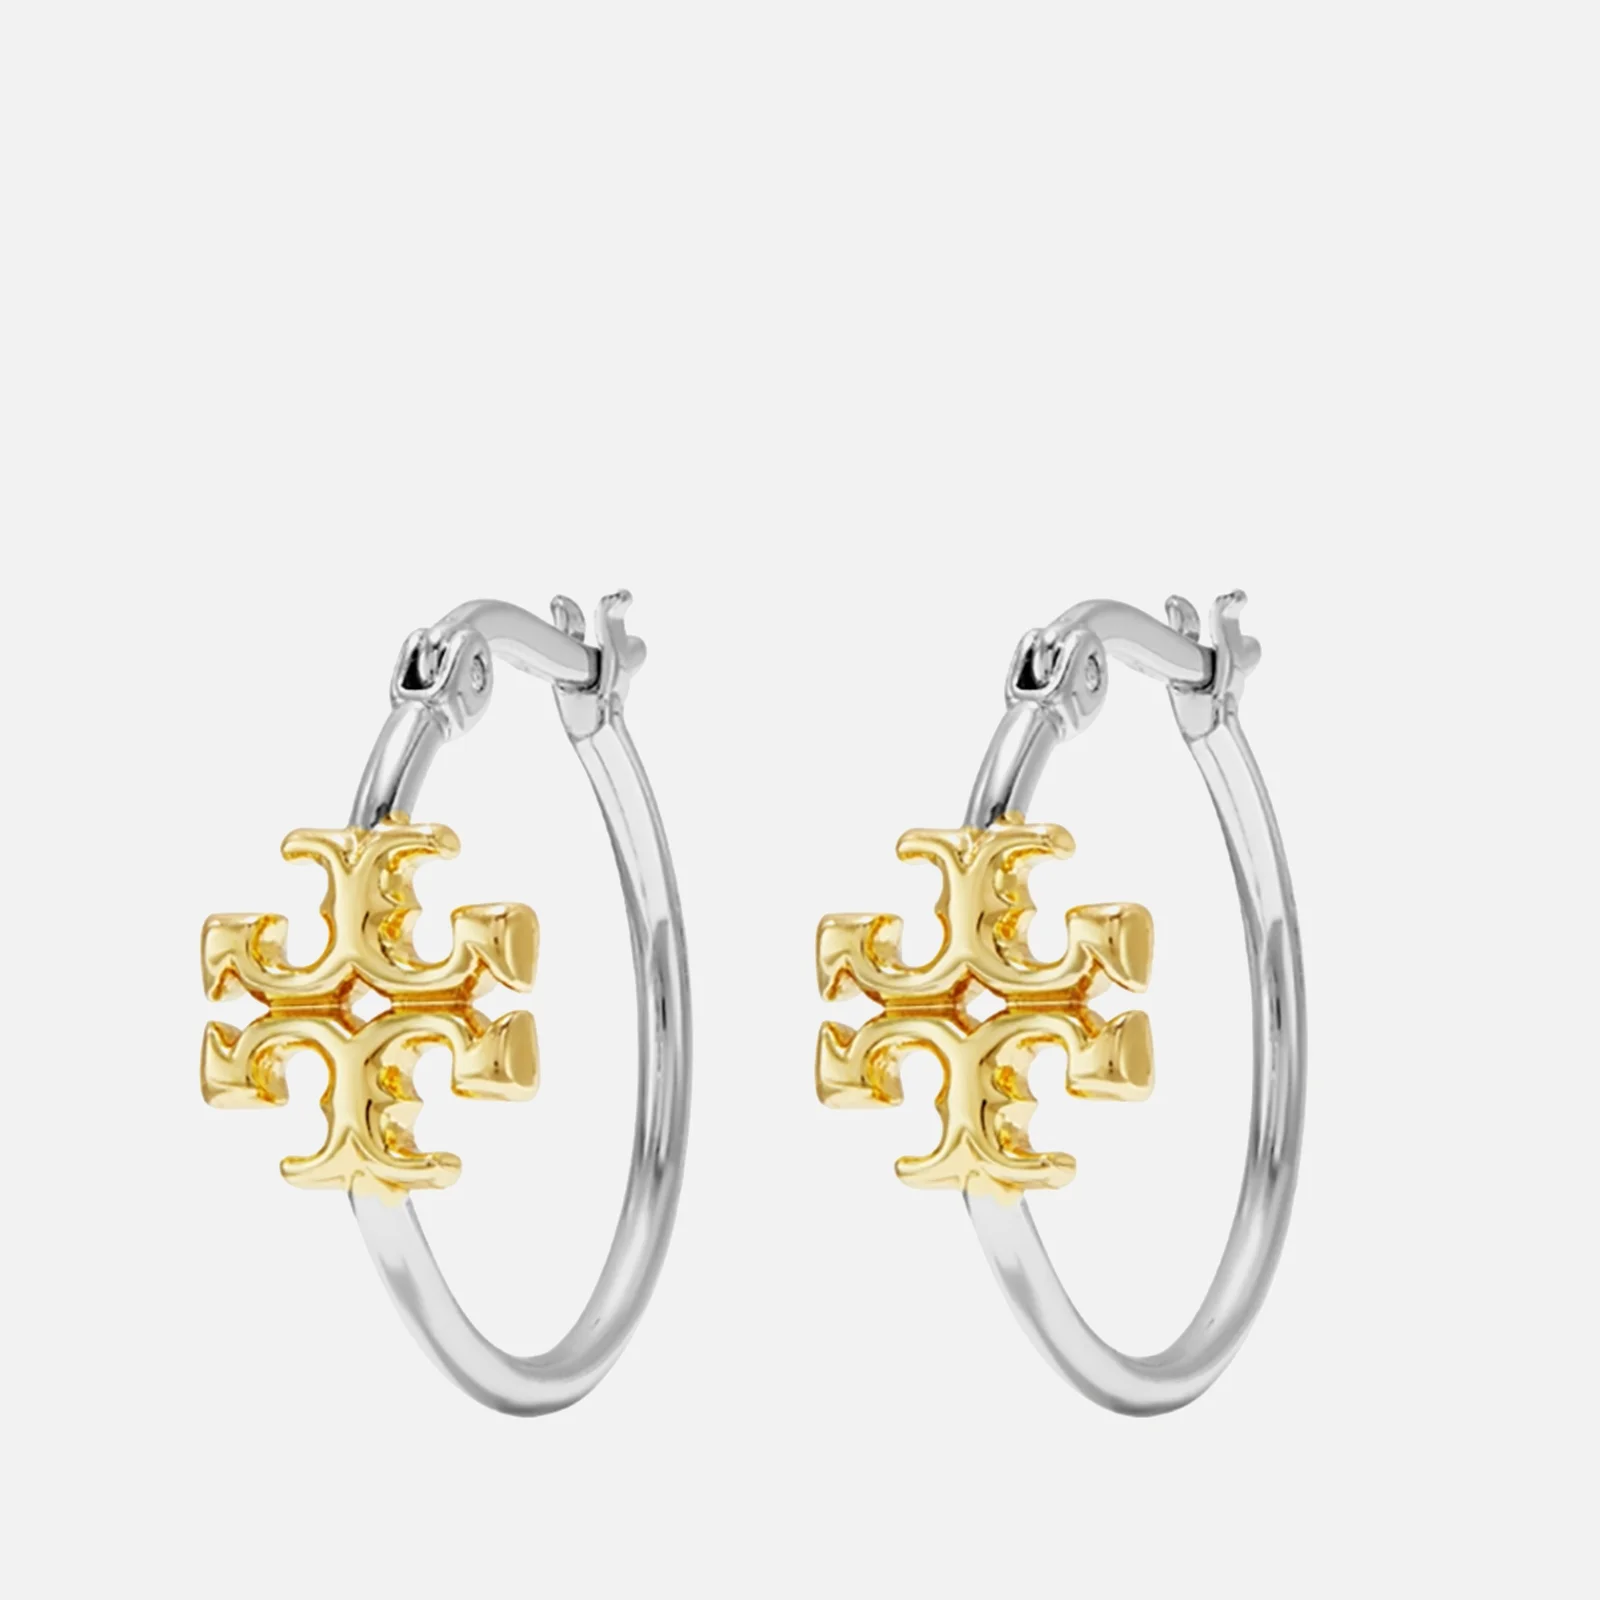 Tory Burch Small Eleanor Gold and Silver-Tone Hoop Earrings Image 1